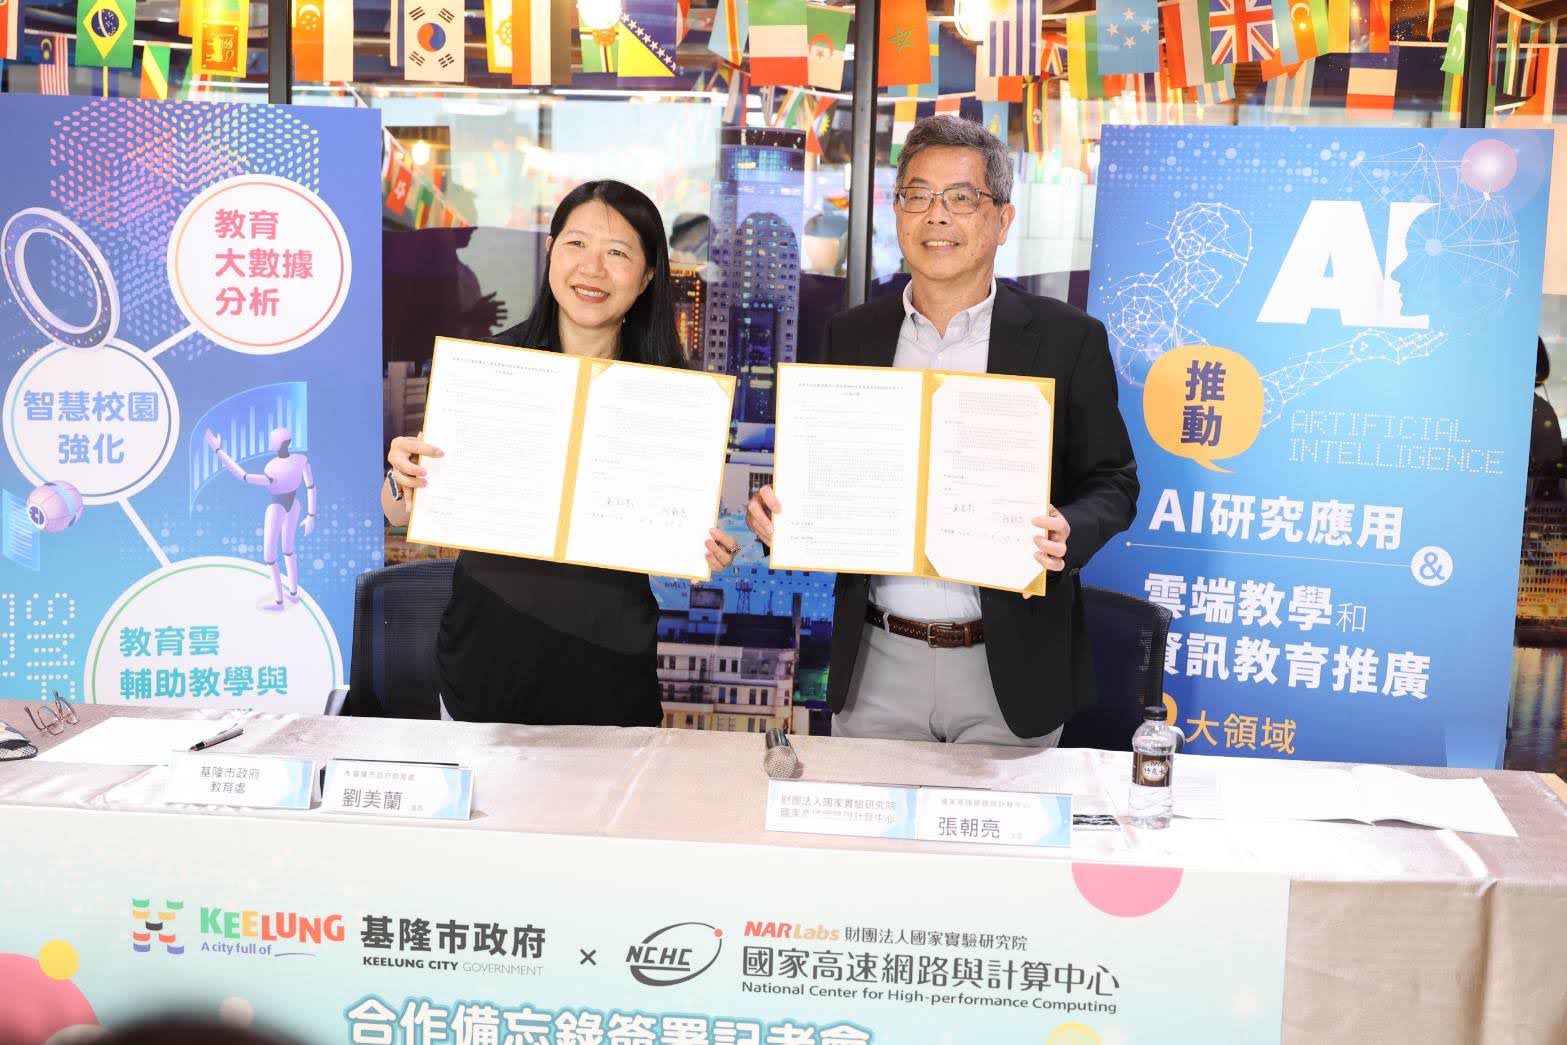 Keelung City Department of Education Director Liu Meilan (left) and the NCHC of Narlabs Director General Chang Chau-Lyan signed the Memorandum of Understanding